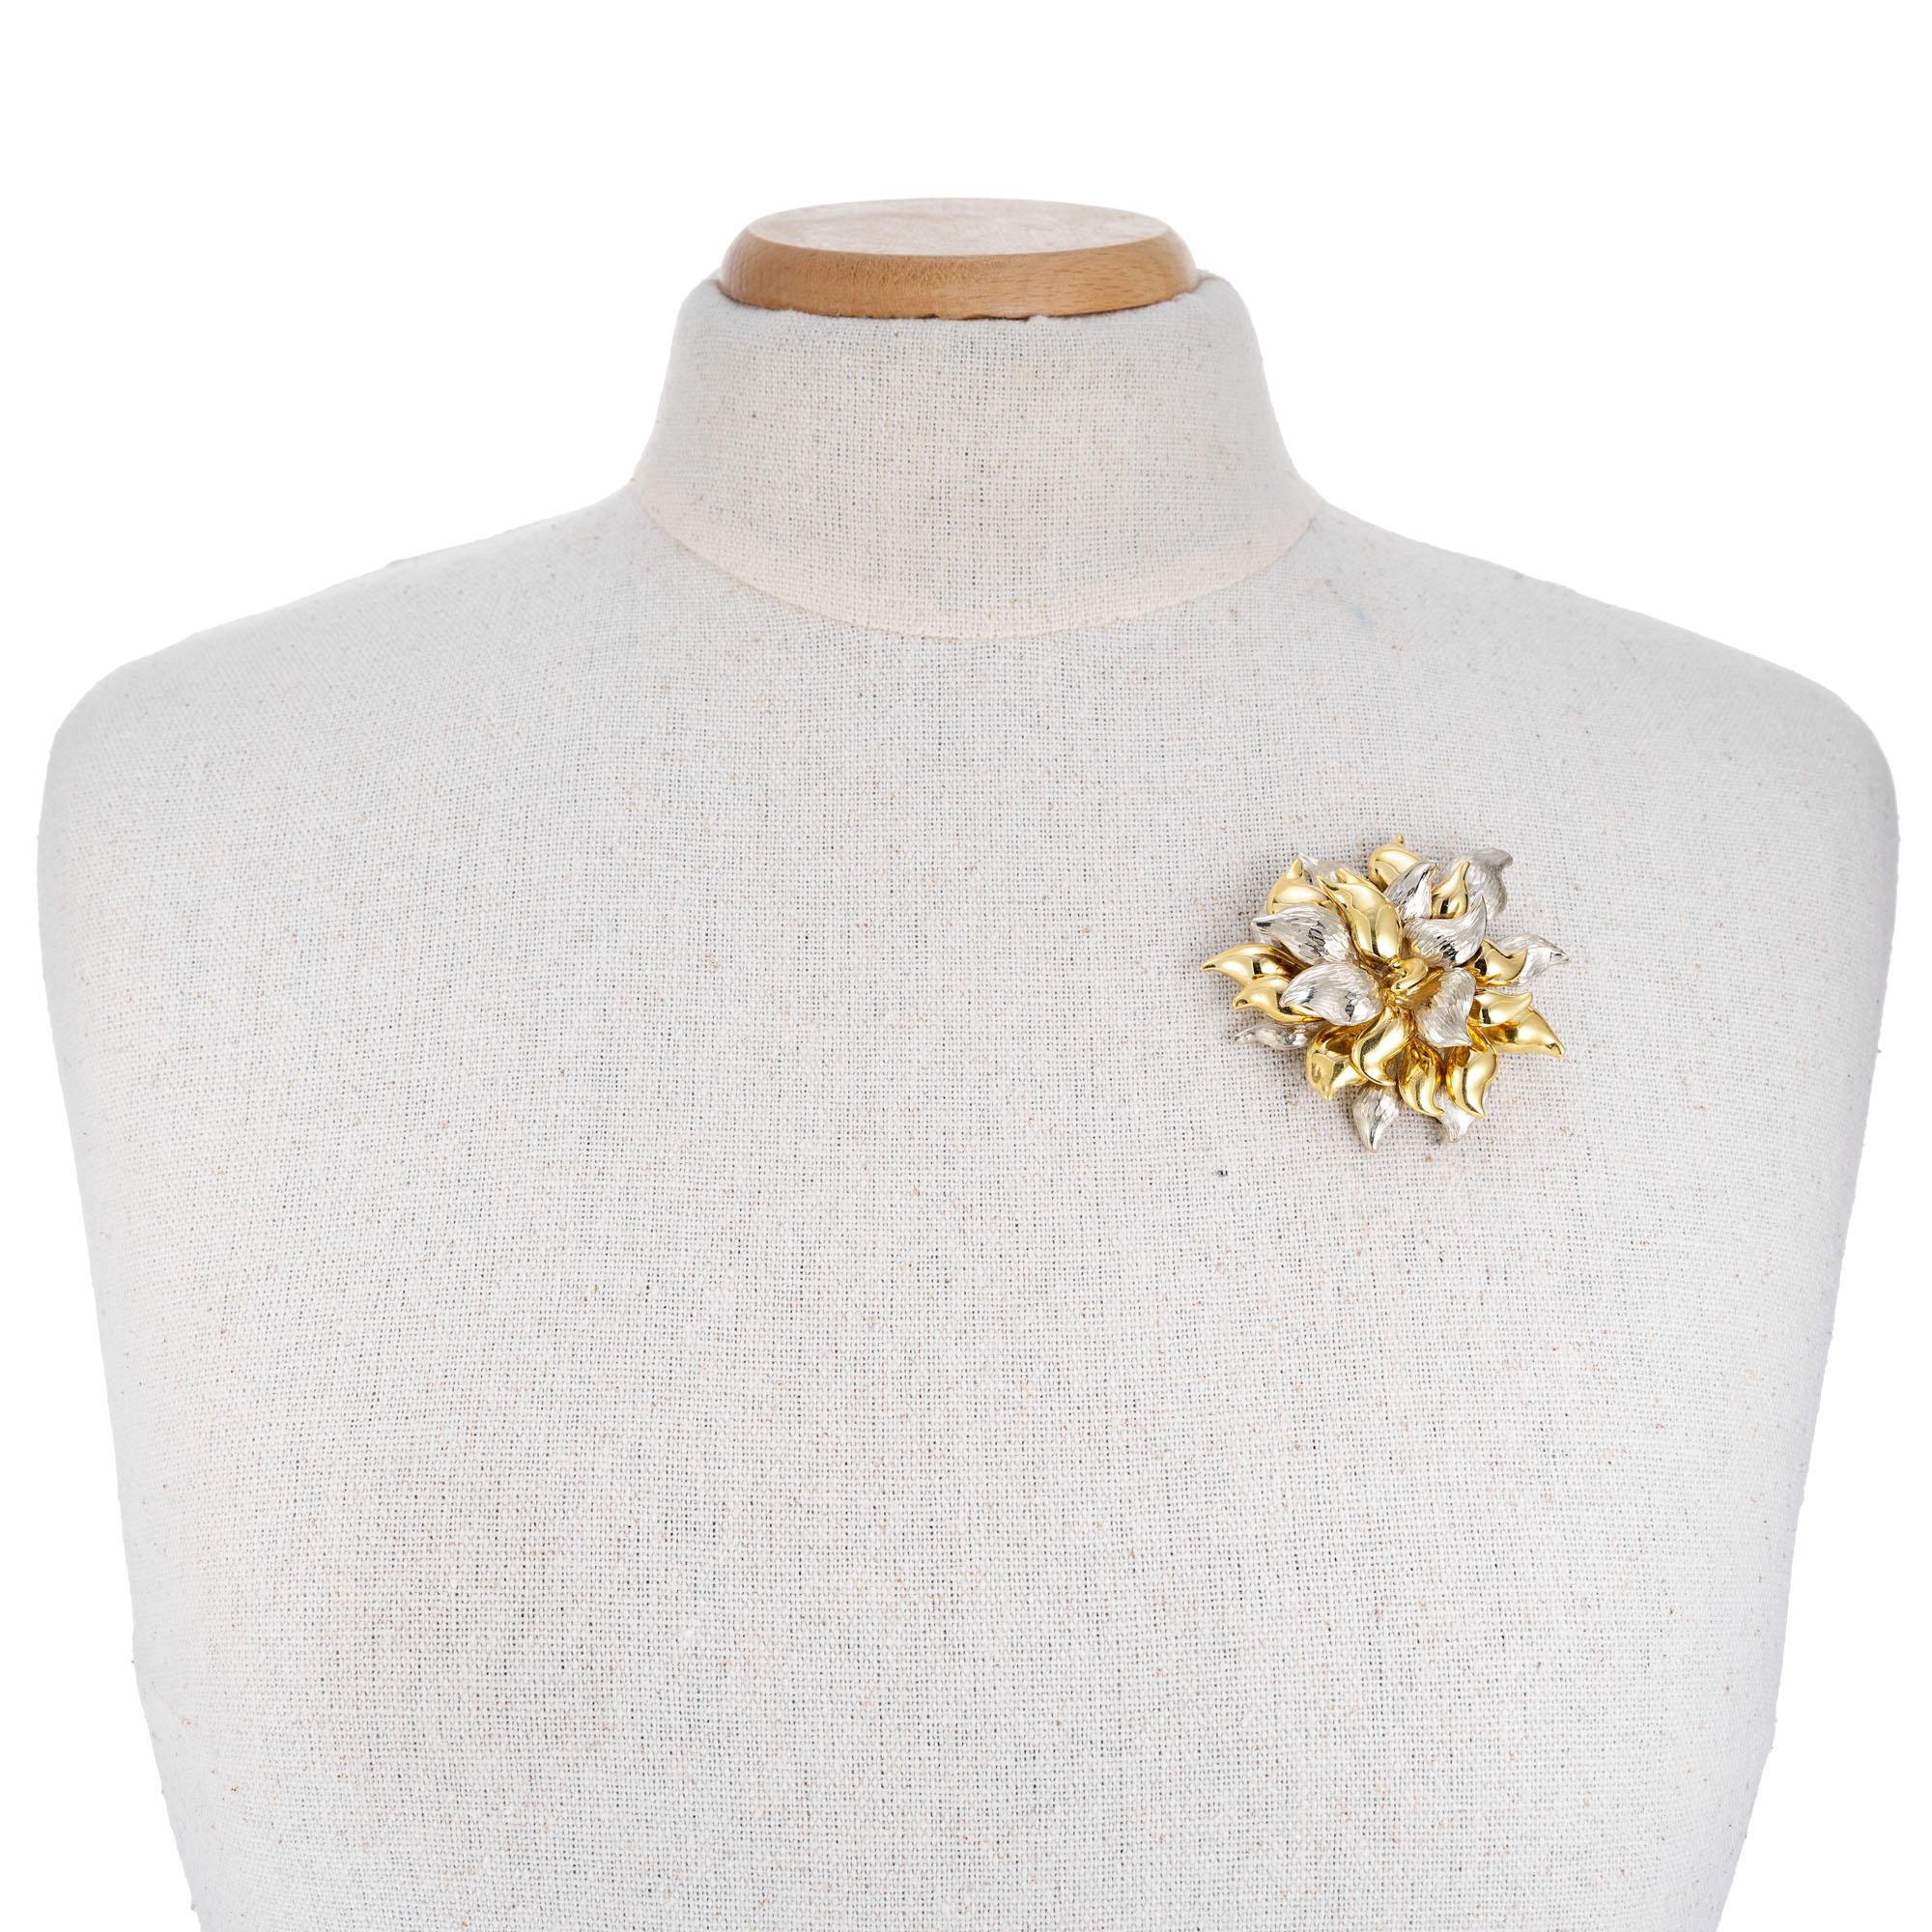 Tiffany & Co. Yellow White Gold Flower Brooch In Excellent Condition For Sale In Stamford, CT